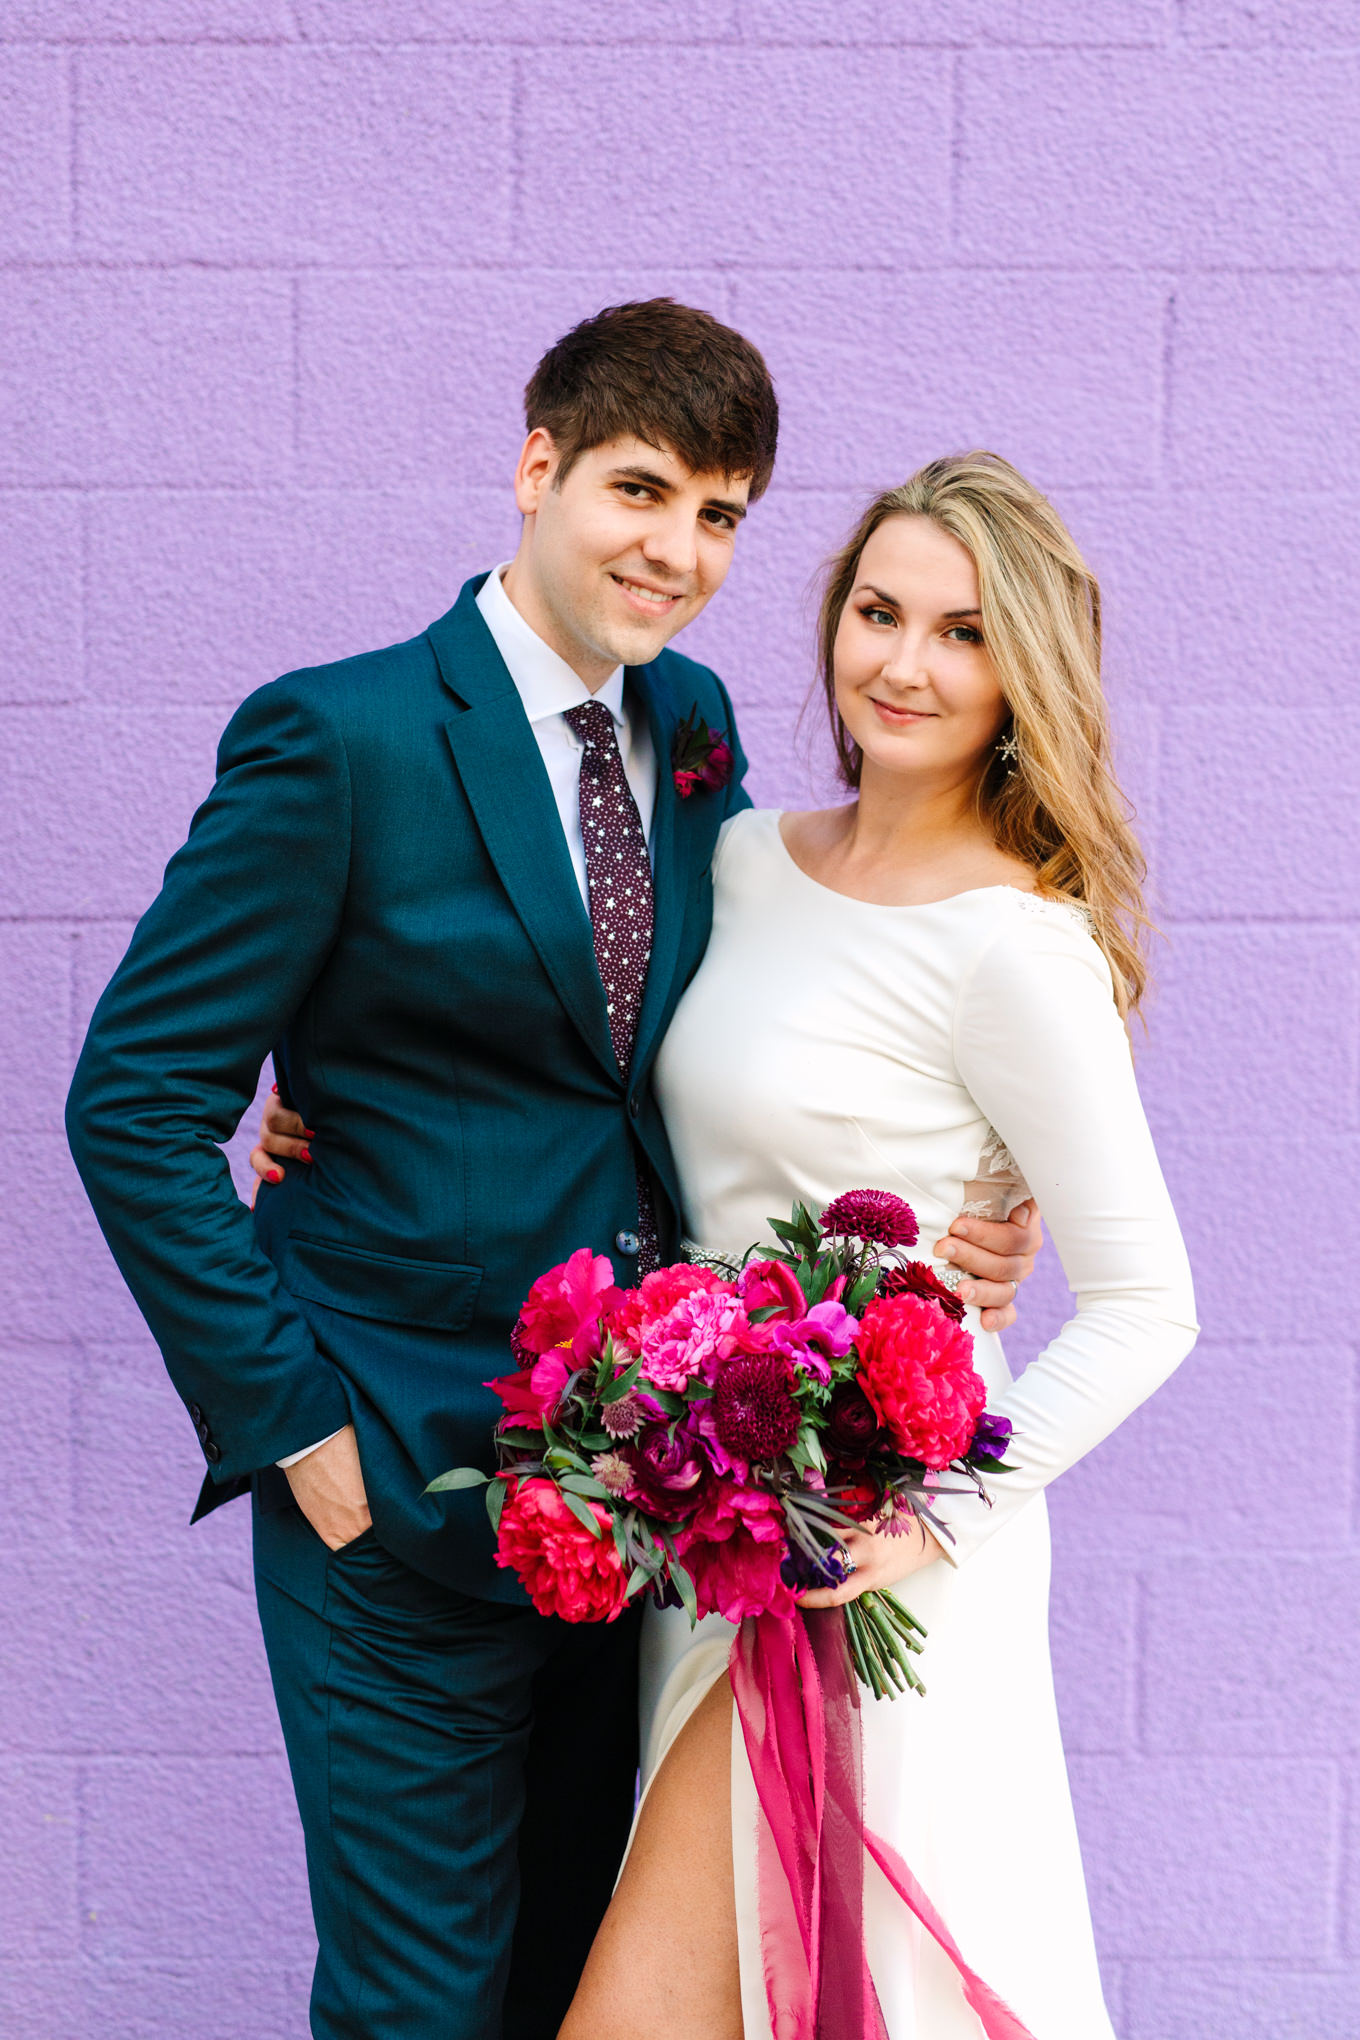 Wedding portrait at colorful Saguaro Hotel | Colorful jewel tone Palm Springs elopement | Fresh and colorful photography for fun-loving couples in Southern California | #colorfulelopement #palmspringselopement #elopementphotography #palmspringswedding Source: Mary Costa Photography | Los Angeles